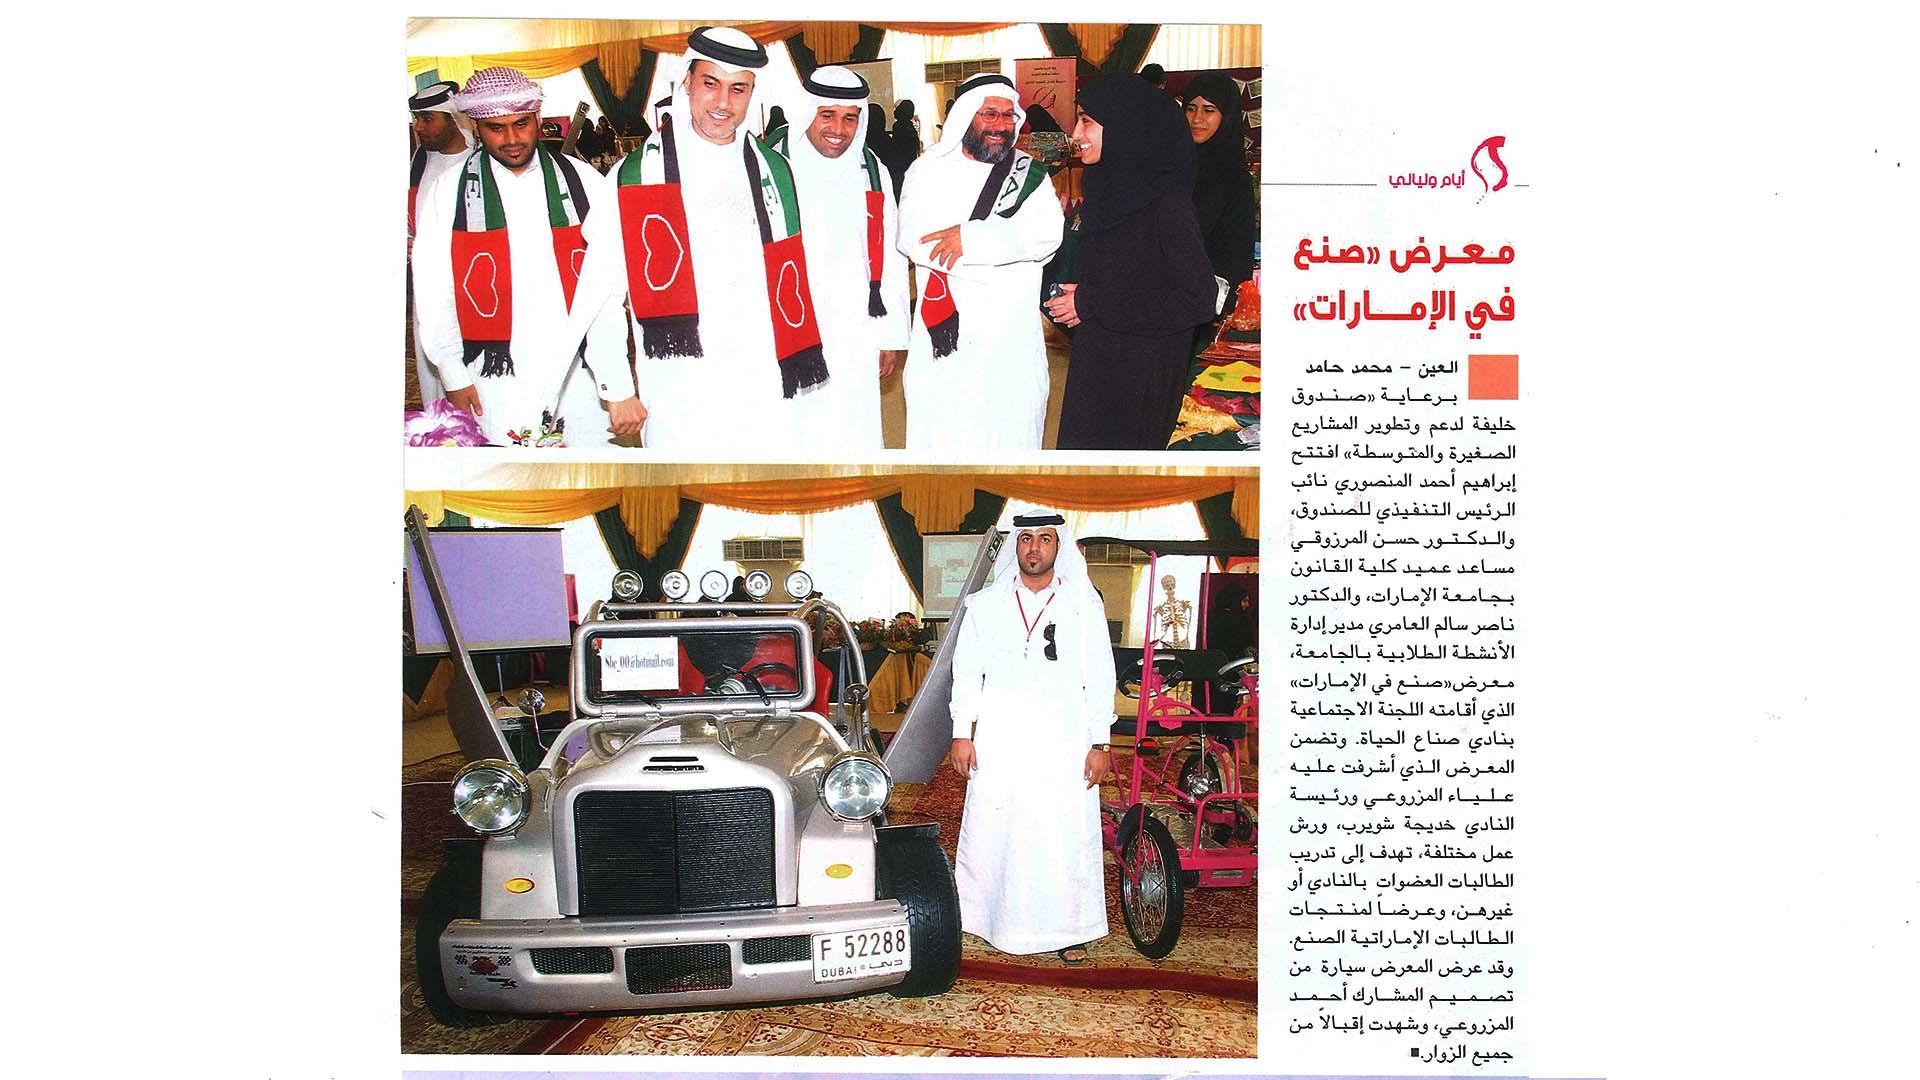 Made in UAE exhibition